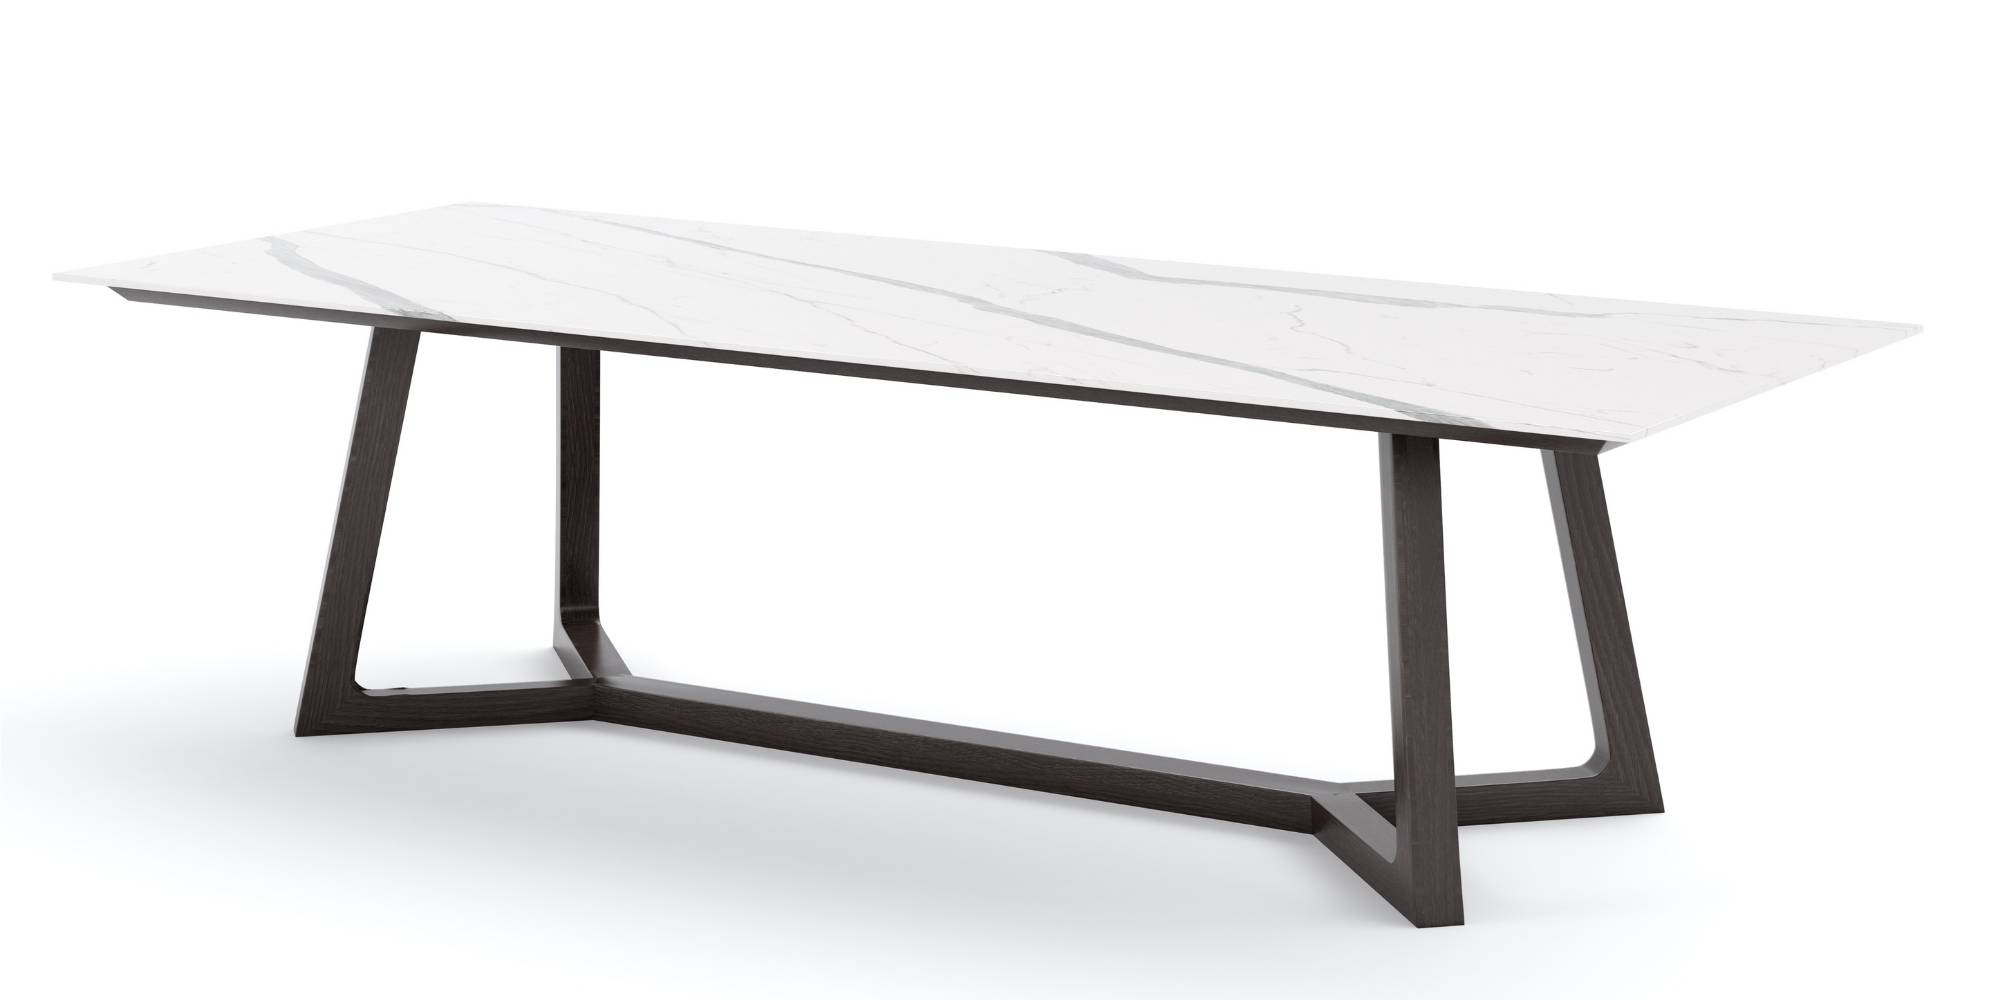 Cascais Porcelain Dining Table in Outdoor Tables Dining Tables for Porto Asteri collection